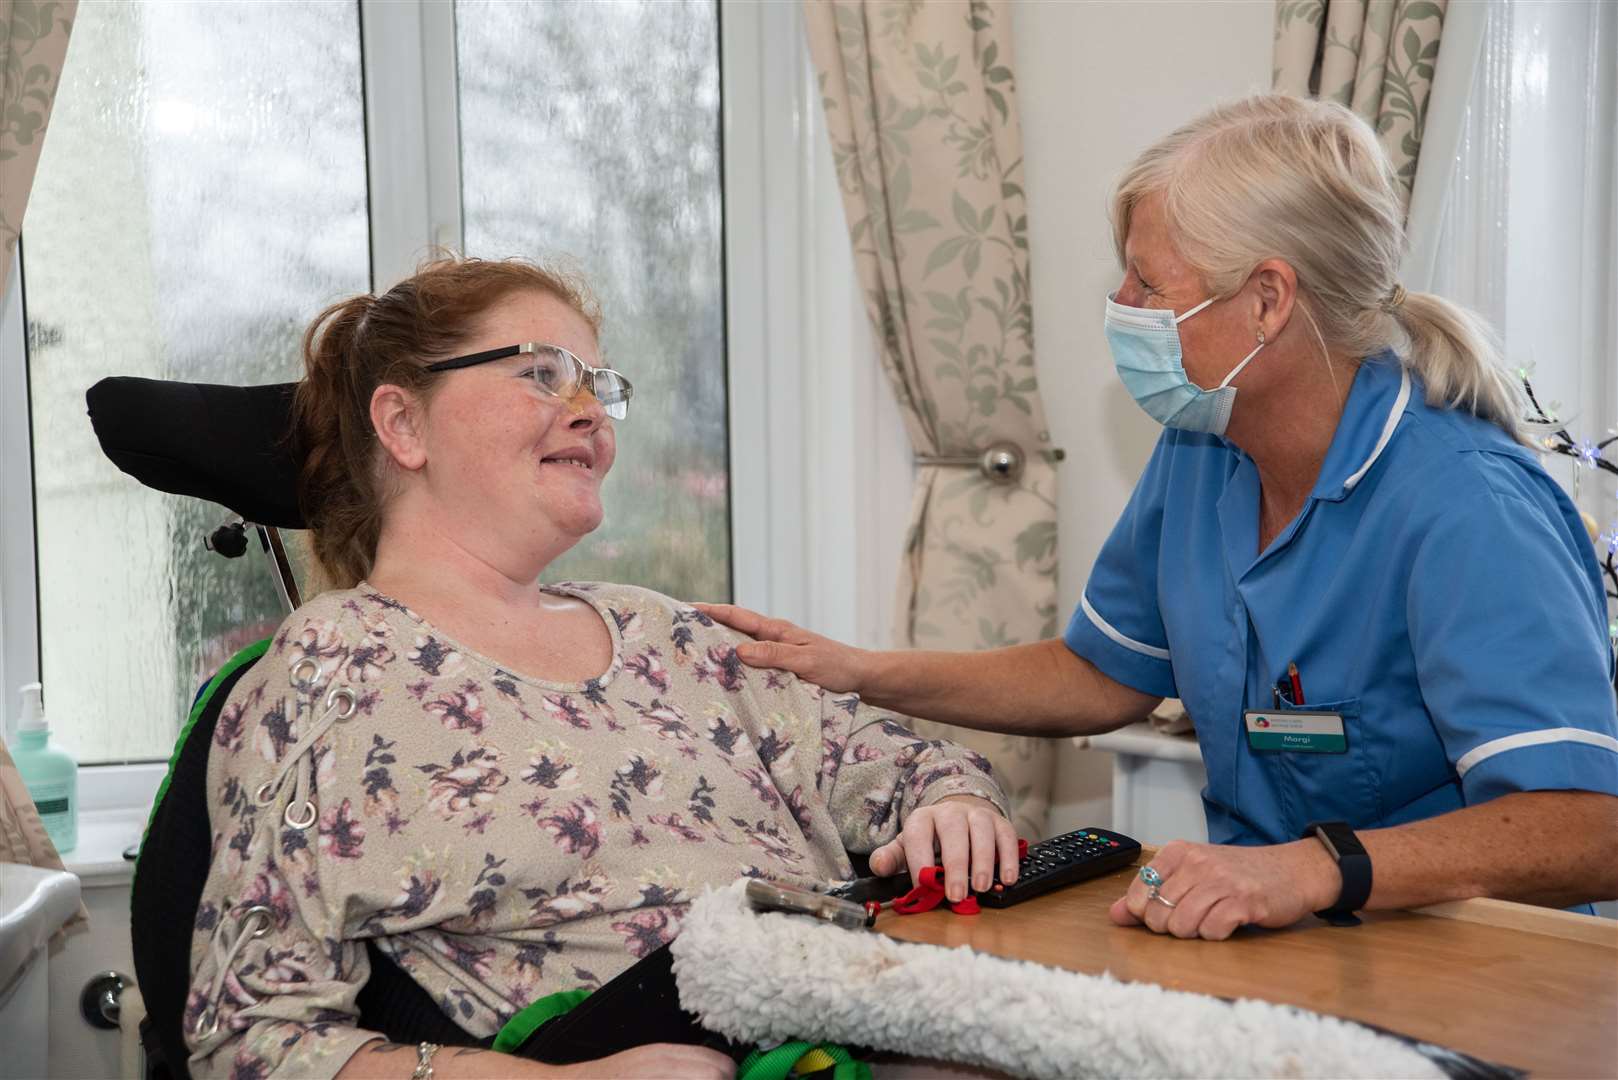 Hythe Care has welcomed back visitors to its nursing homes